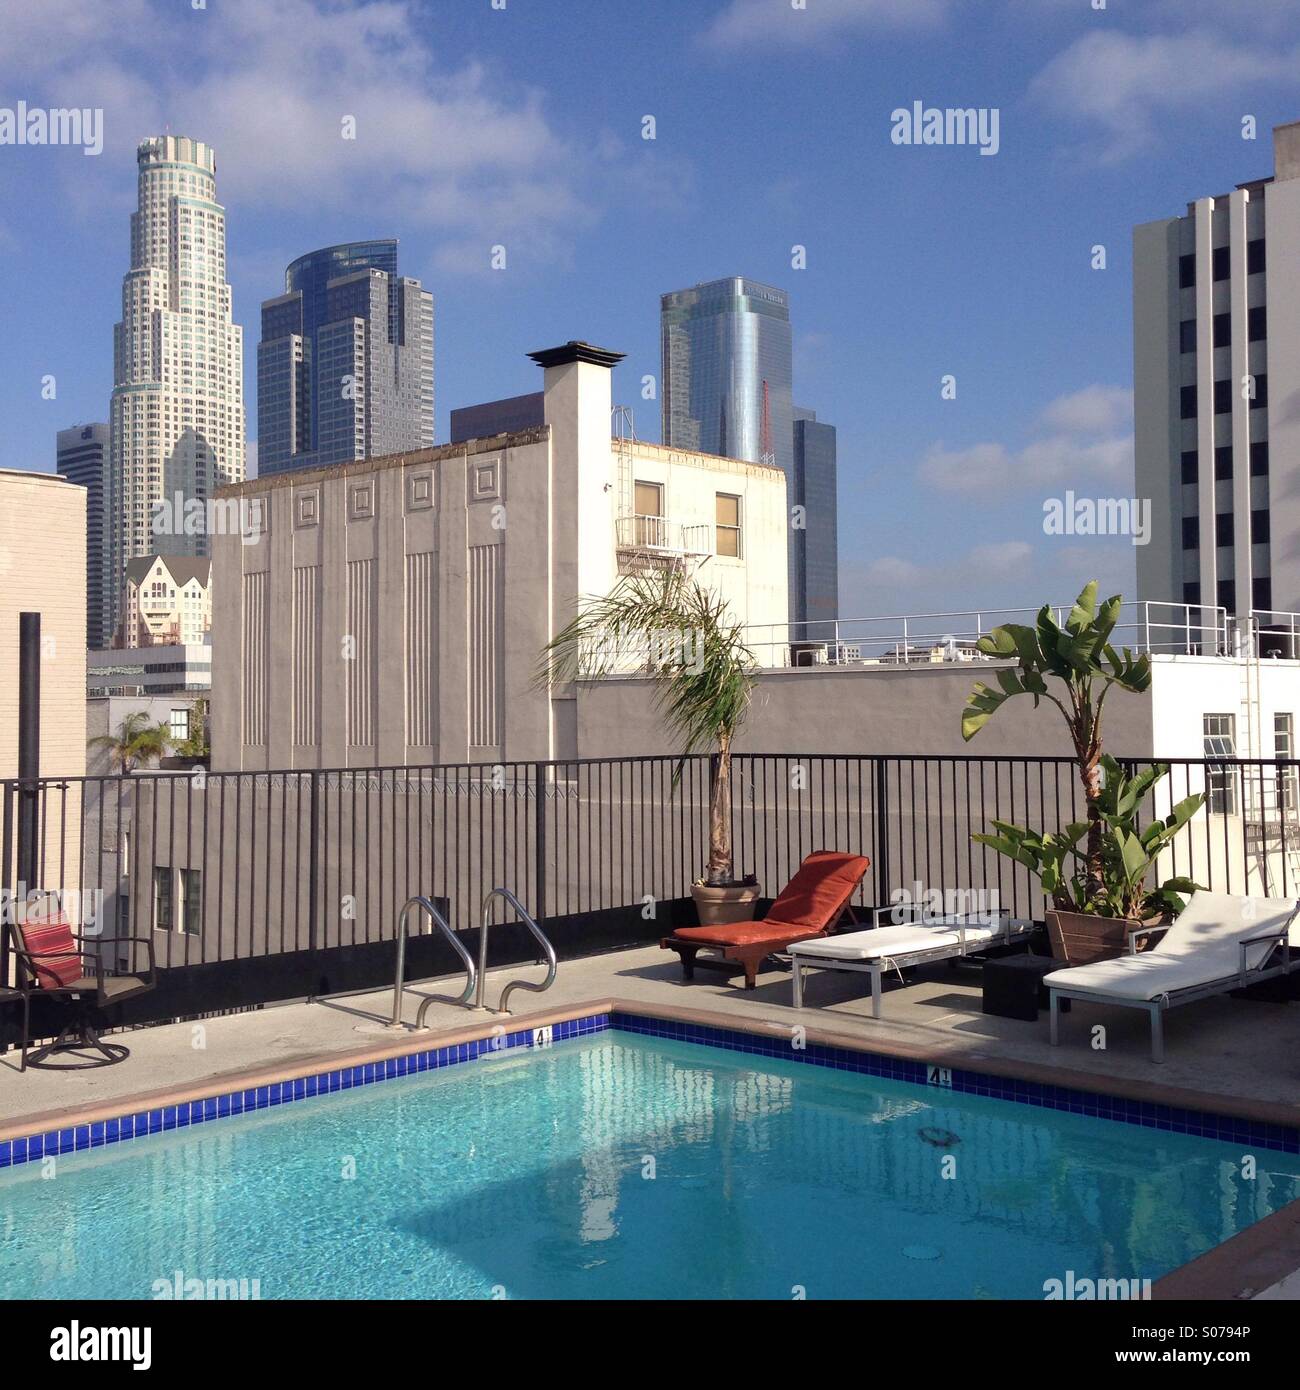 Penthouse pool in down town Los Angeles Stock Photo